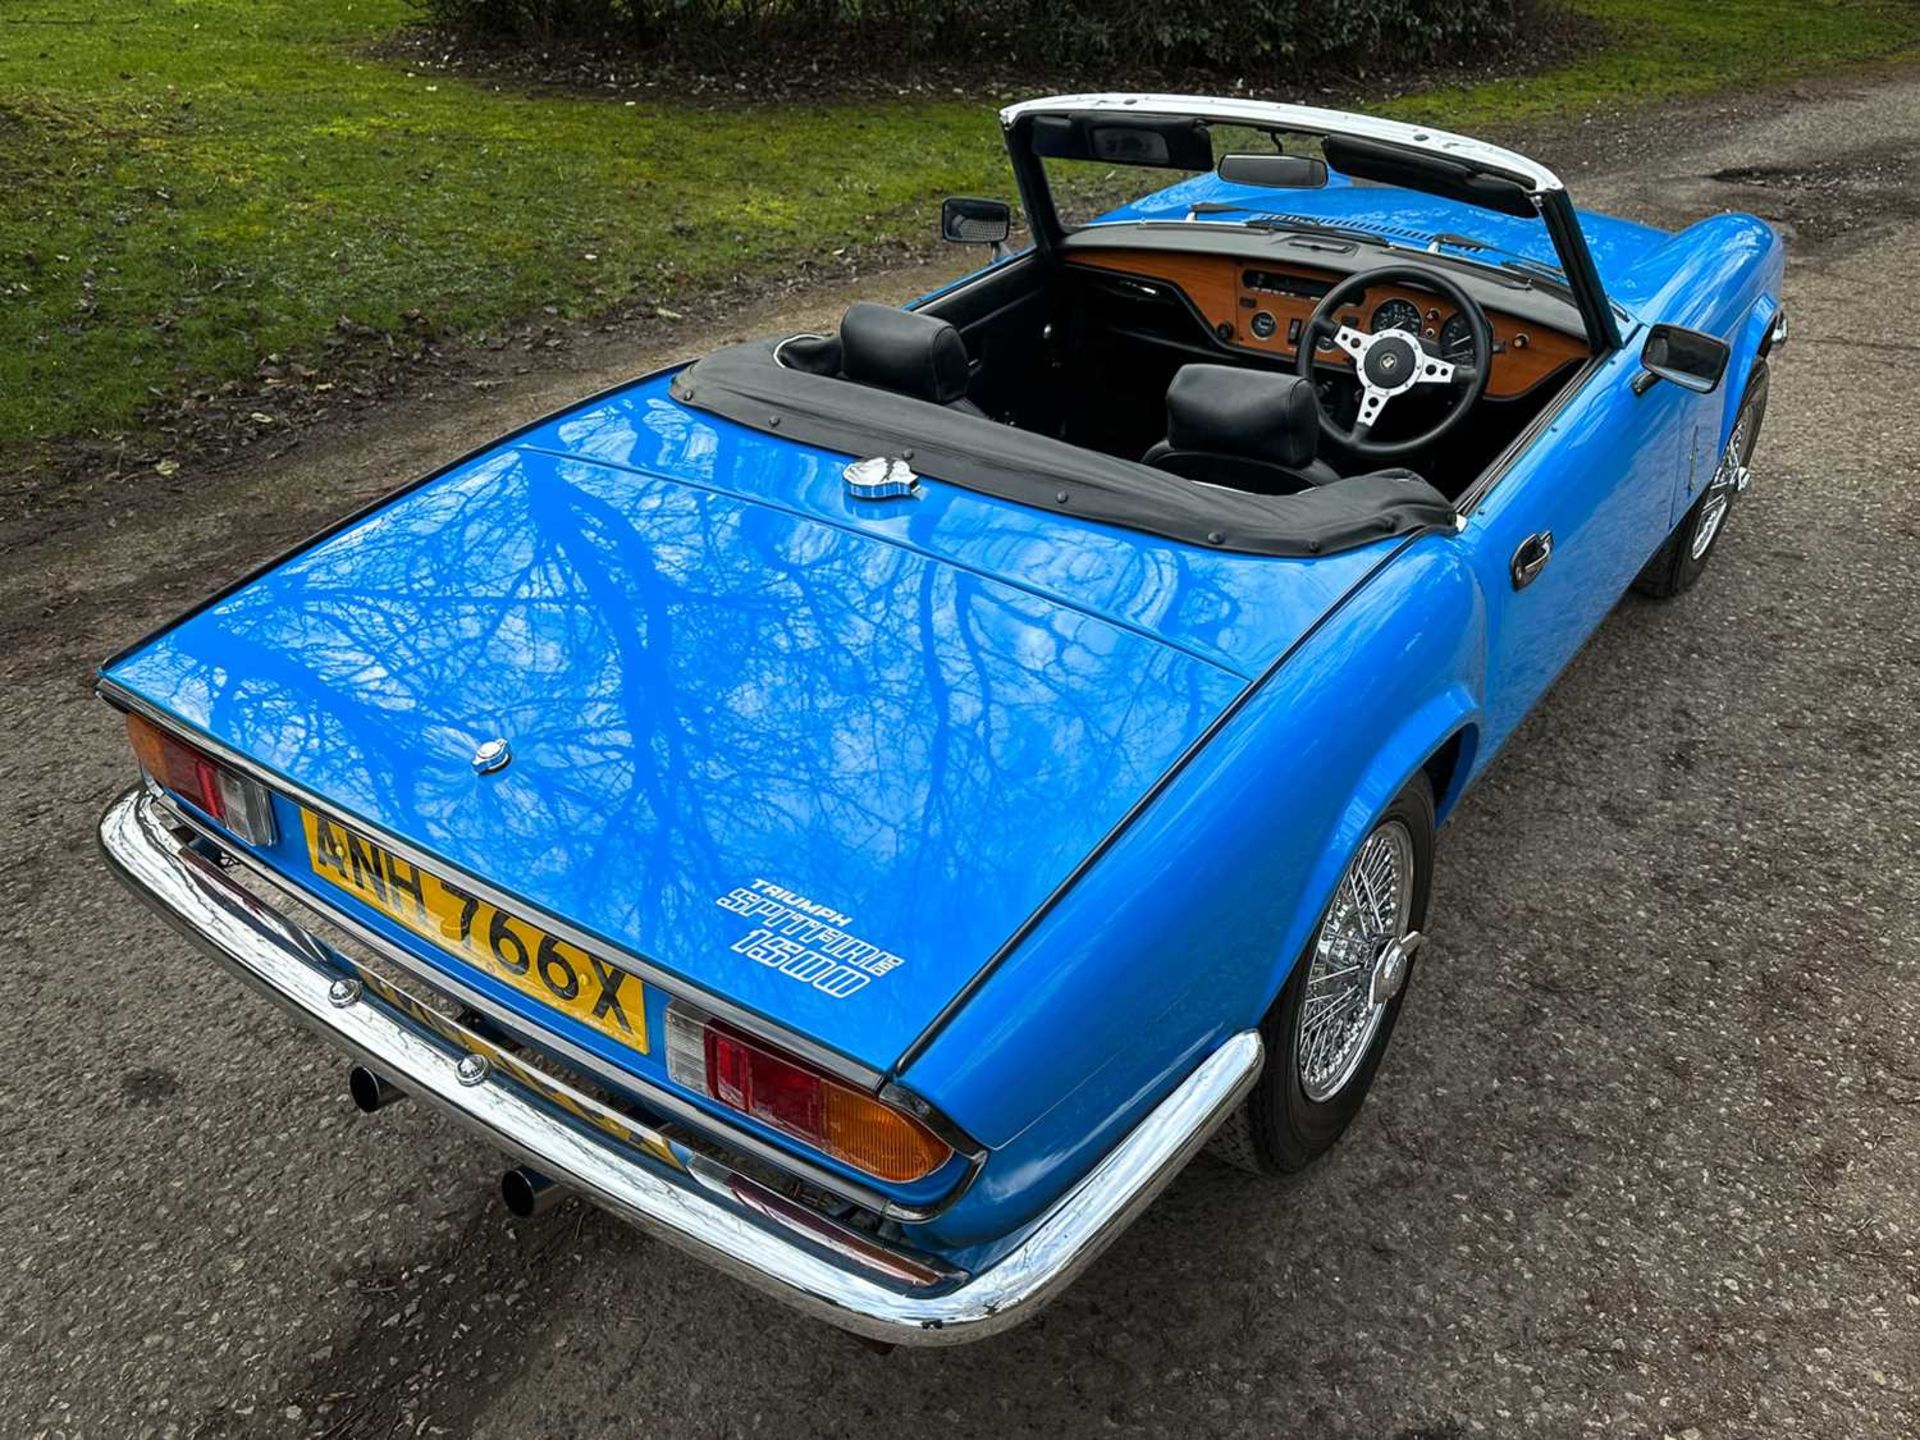 1981 Triumph Spitfire 1500 Comes with original bill of sale - Image 26 of 96